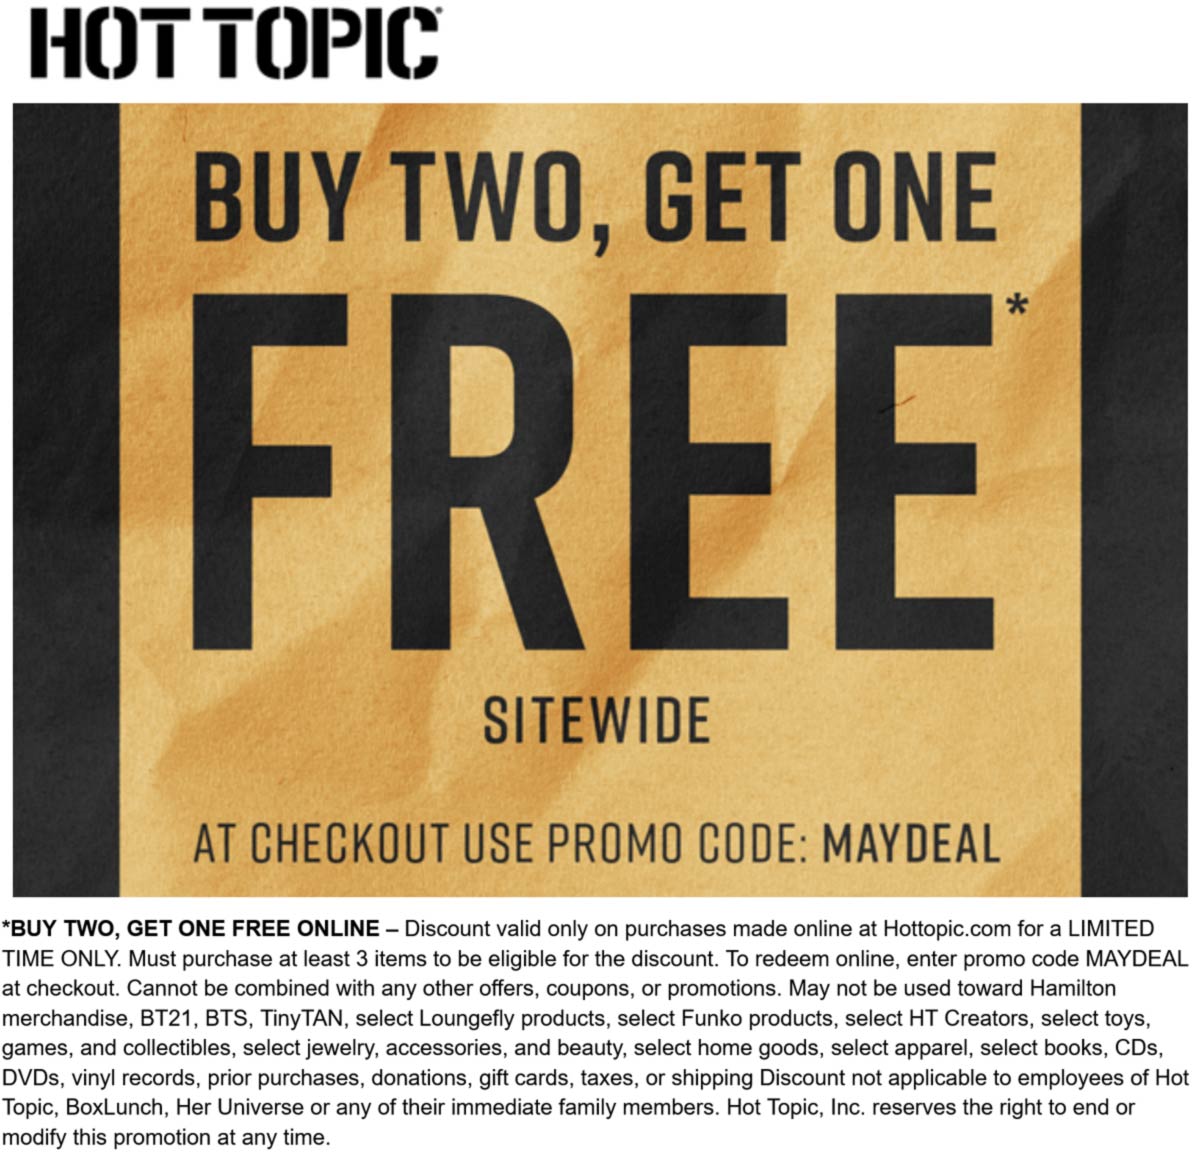 3rd item free today at Hot Topic via promo code MAYDEAL hottopic The